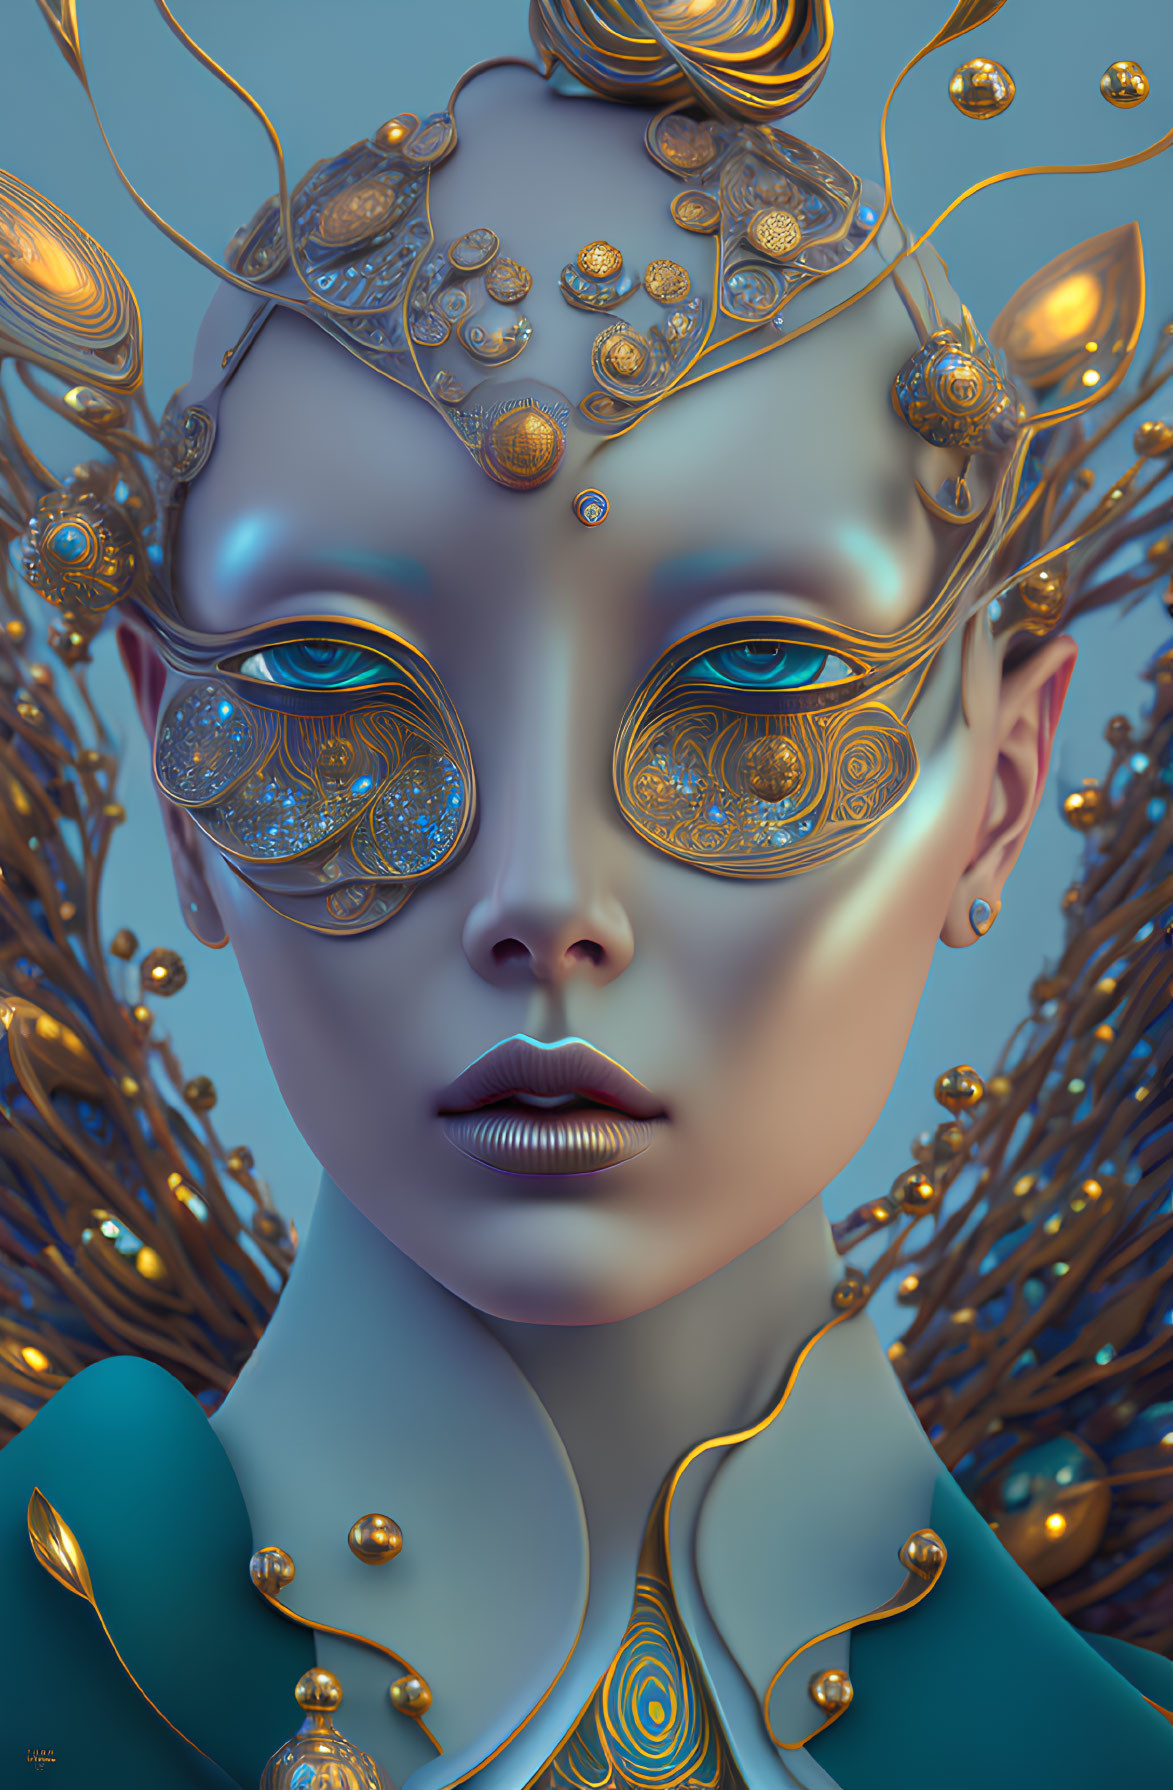 Intricate surreal portrait with golden headpiece and eyewear on blue backdrop